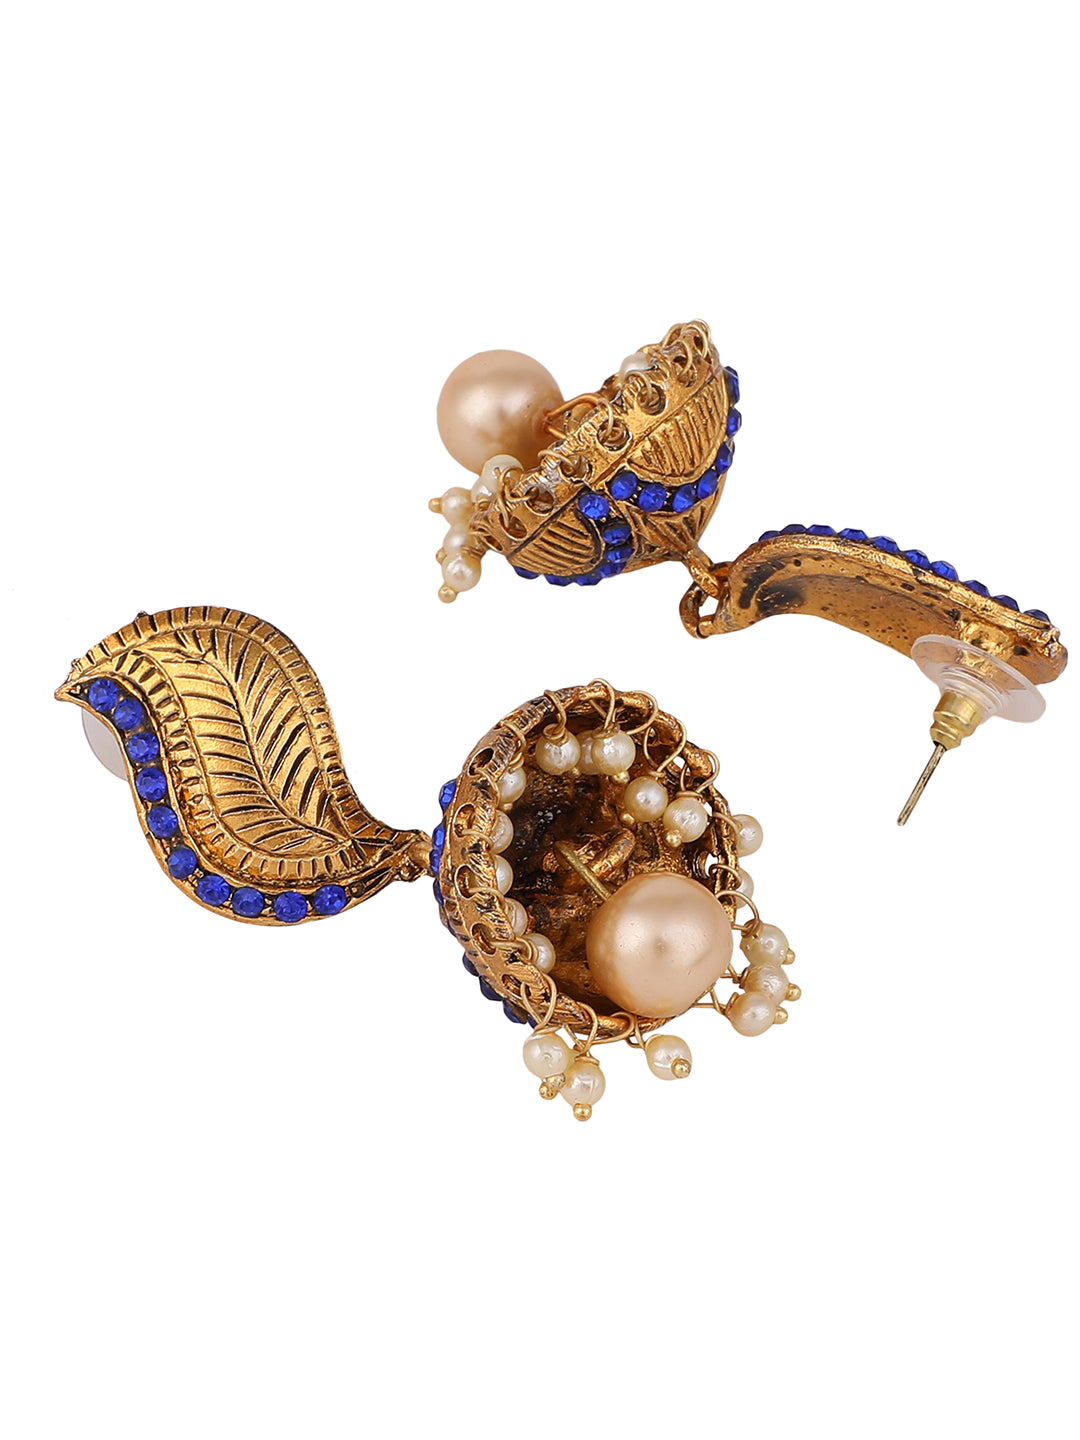 Women's Gold-Toned & LCT Stone Studded & Beaded Dome Shaped Jhumkas Earrings - Anikas Creation